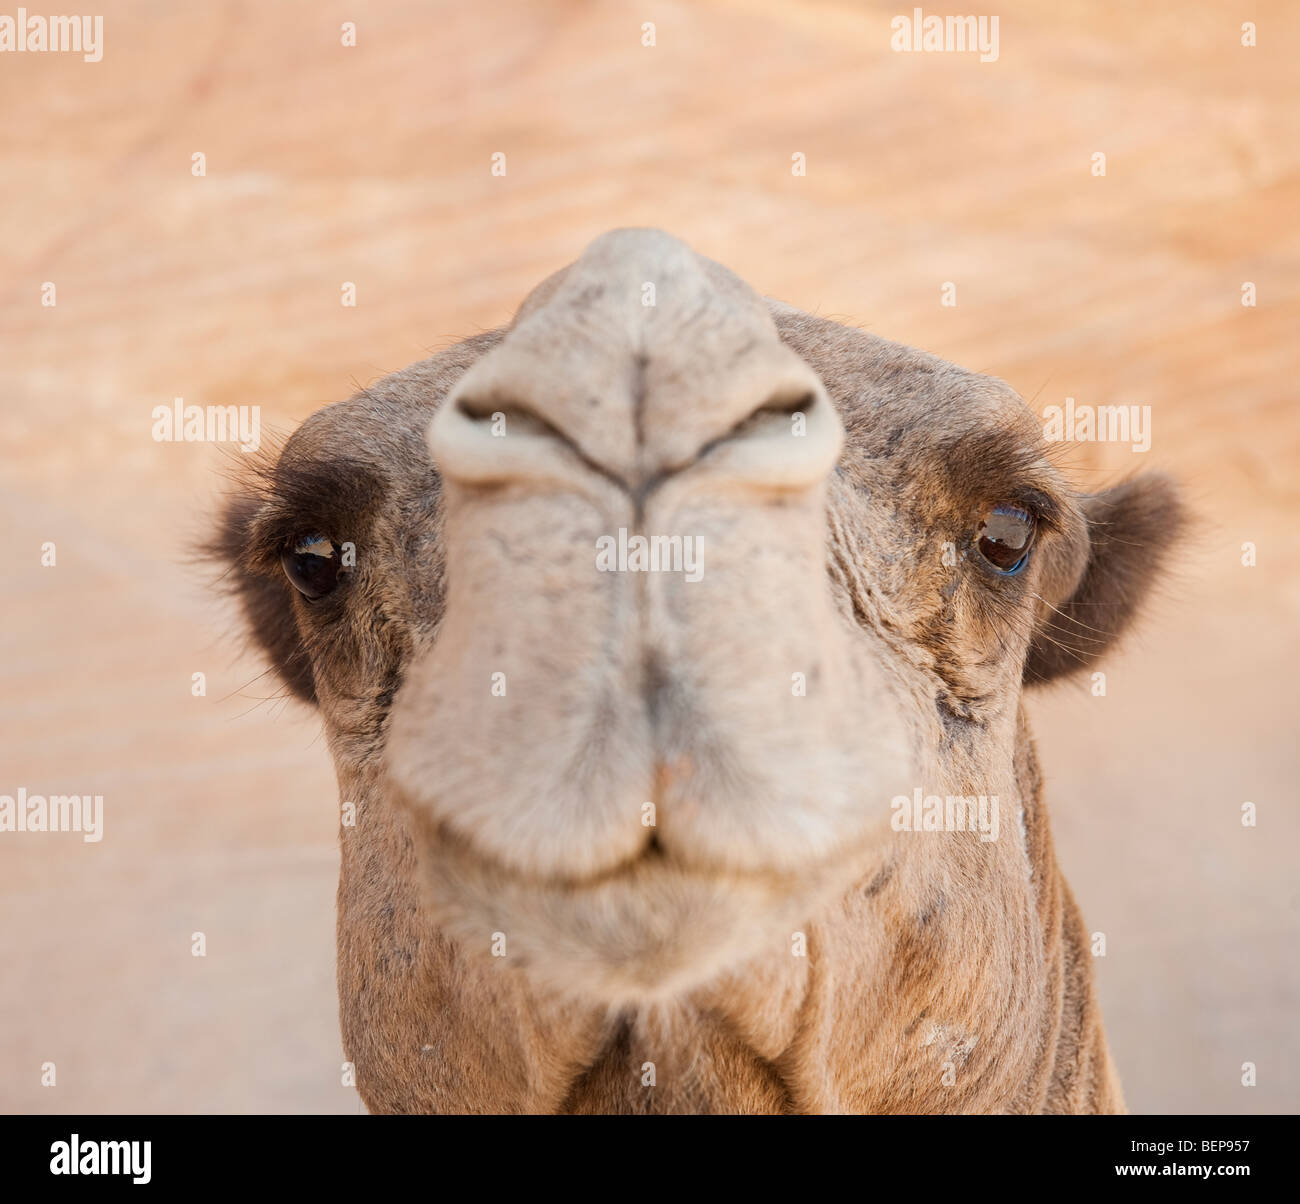 A camel in Egypt Stock Photo